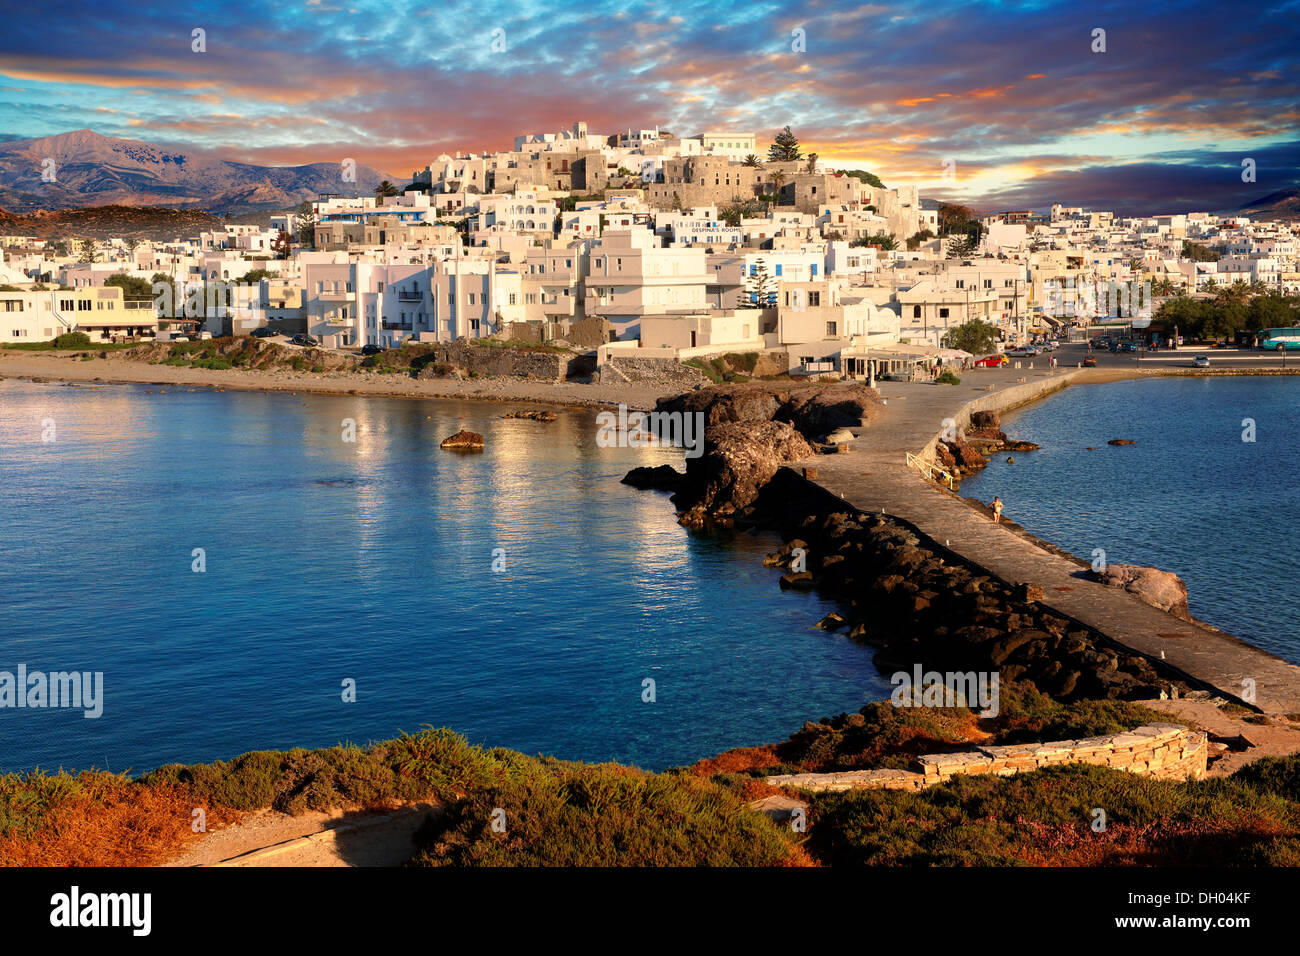 Naxos town at sunset, Cyclades Islands, Greece, Europe Stock Photo